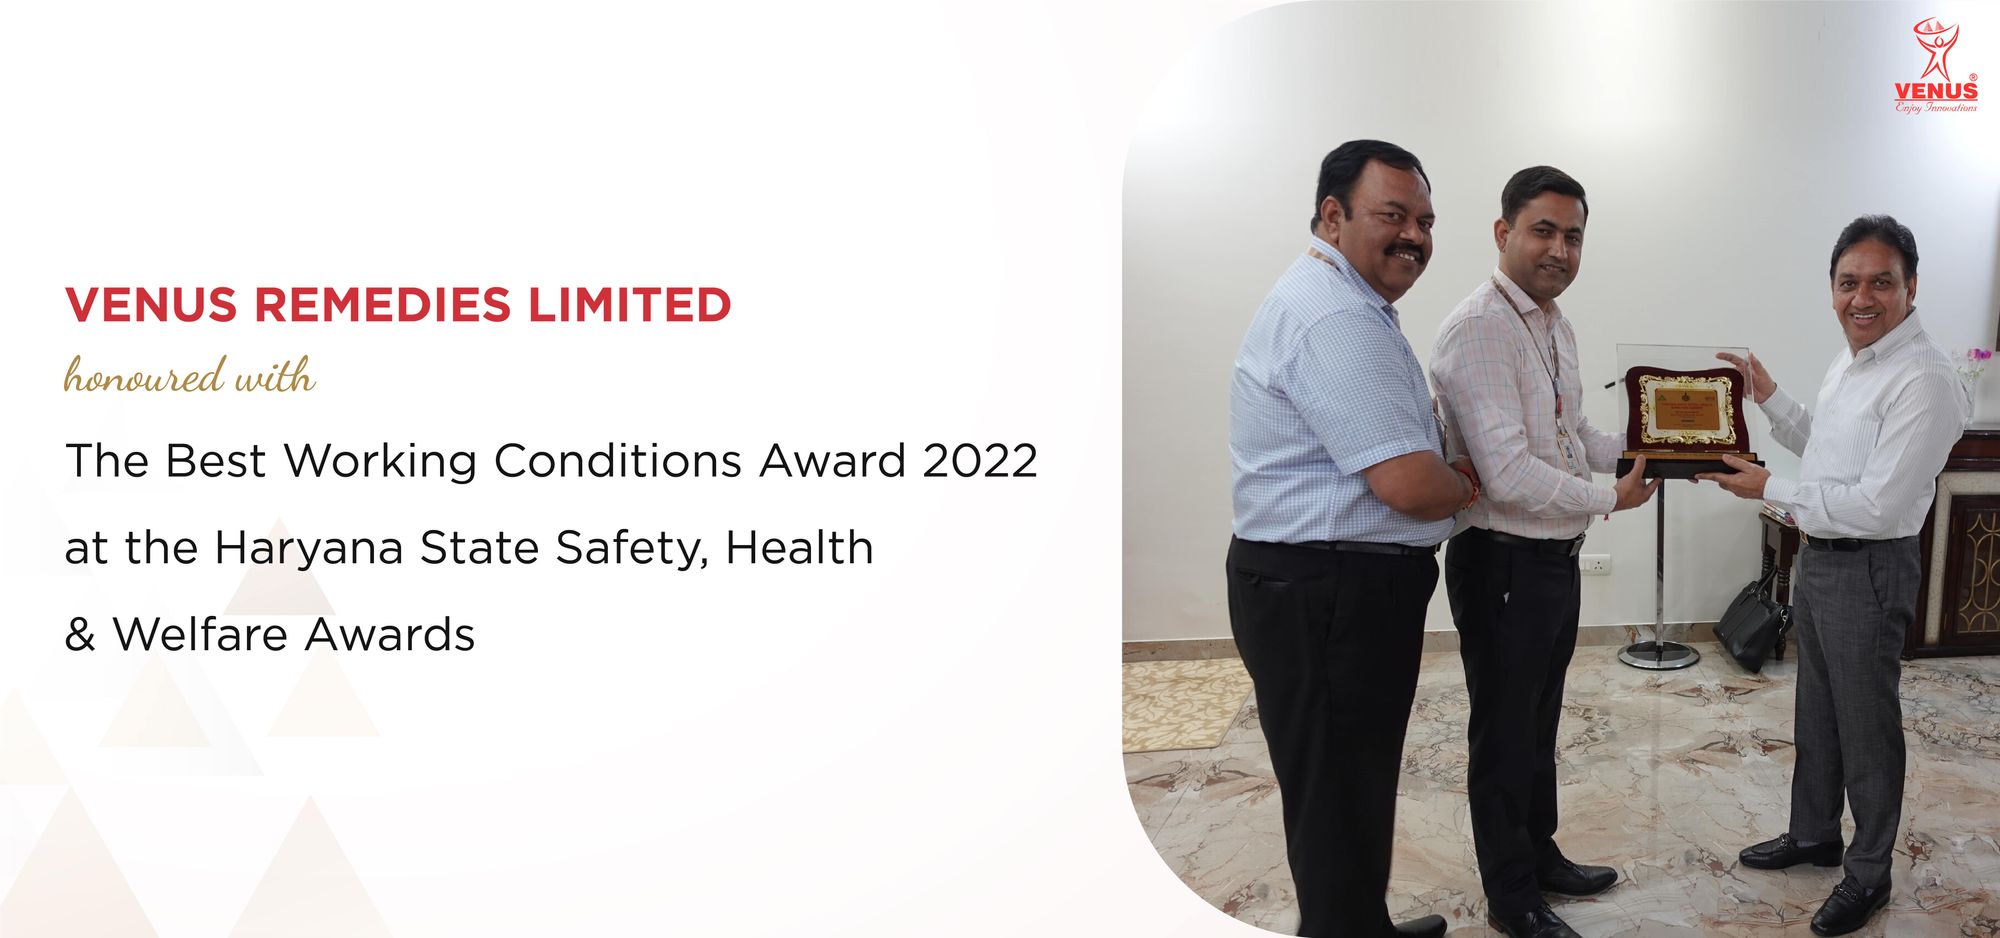 Venus Remedies Limited - Best Working Conditions Award 2022 - Haryana State Safety, Health & Welfare Awards